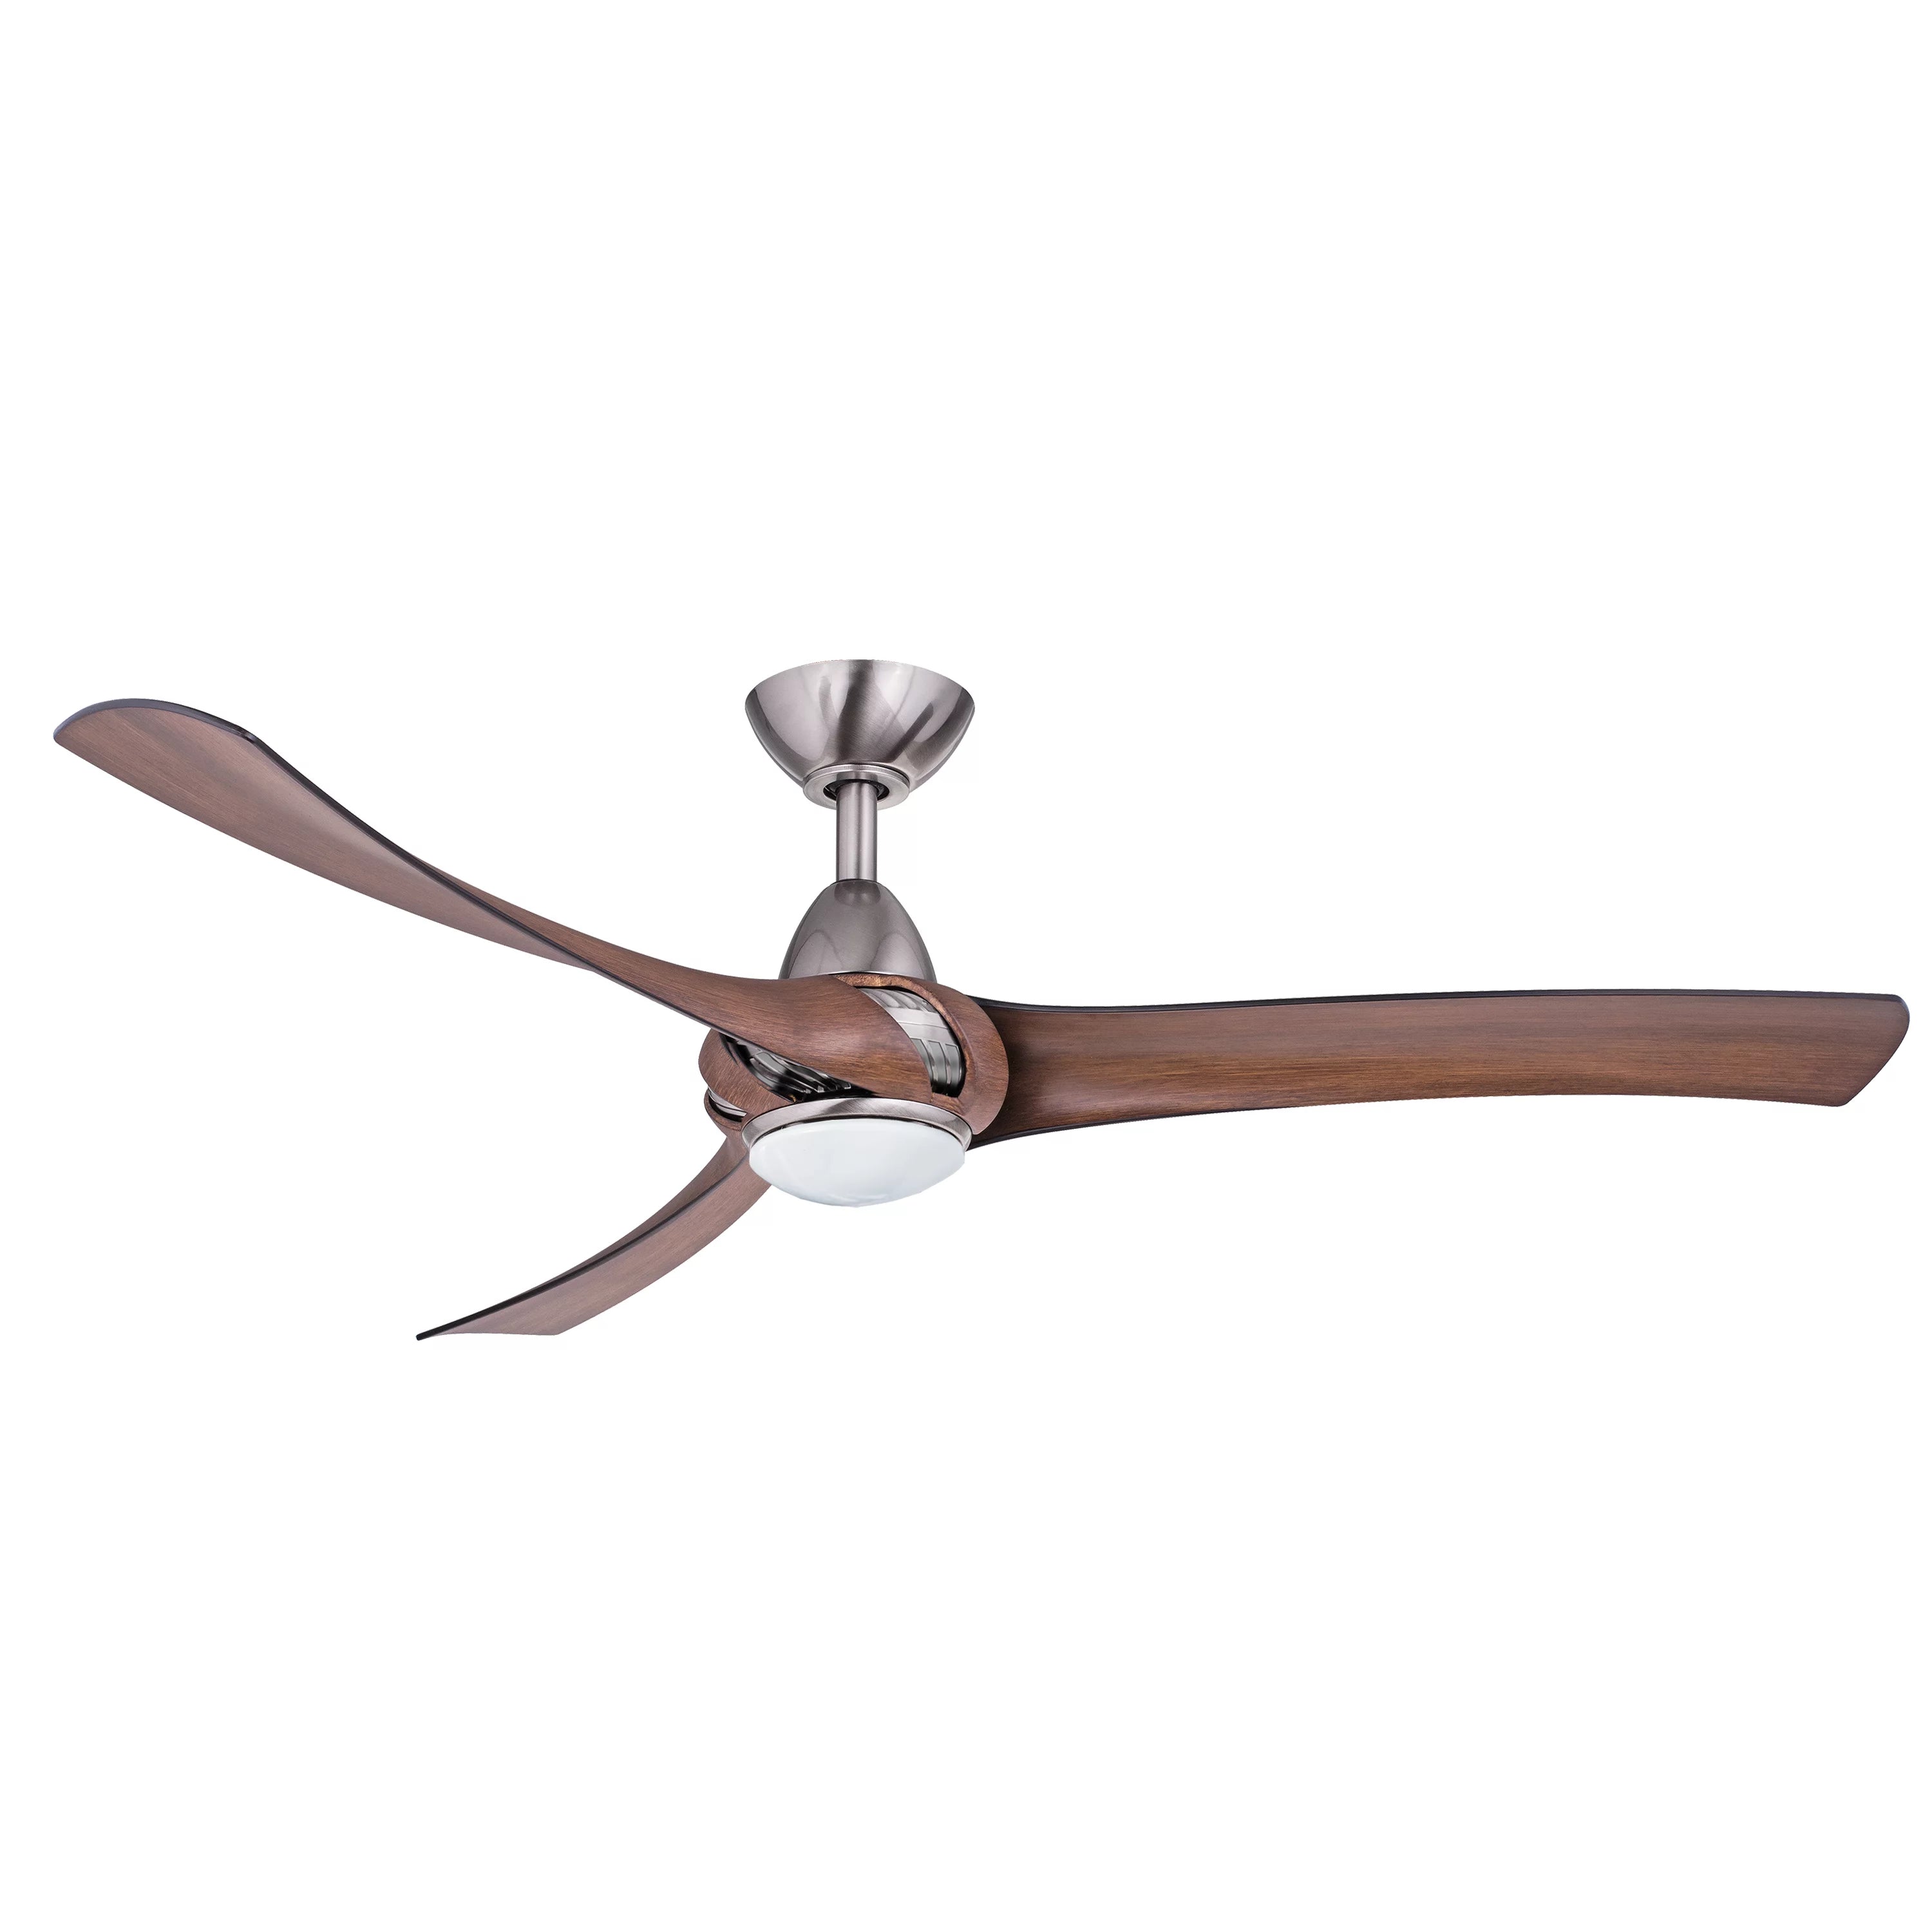 360Fans Arumi V2 52″ (132cm) Pewter/Koa 3 Blade AC Ceiling Fan with 17W Dimmable LED Light & Wall Control